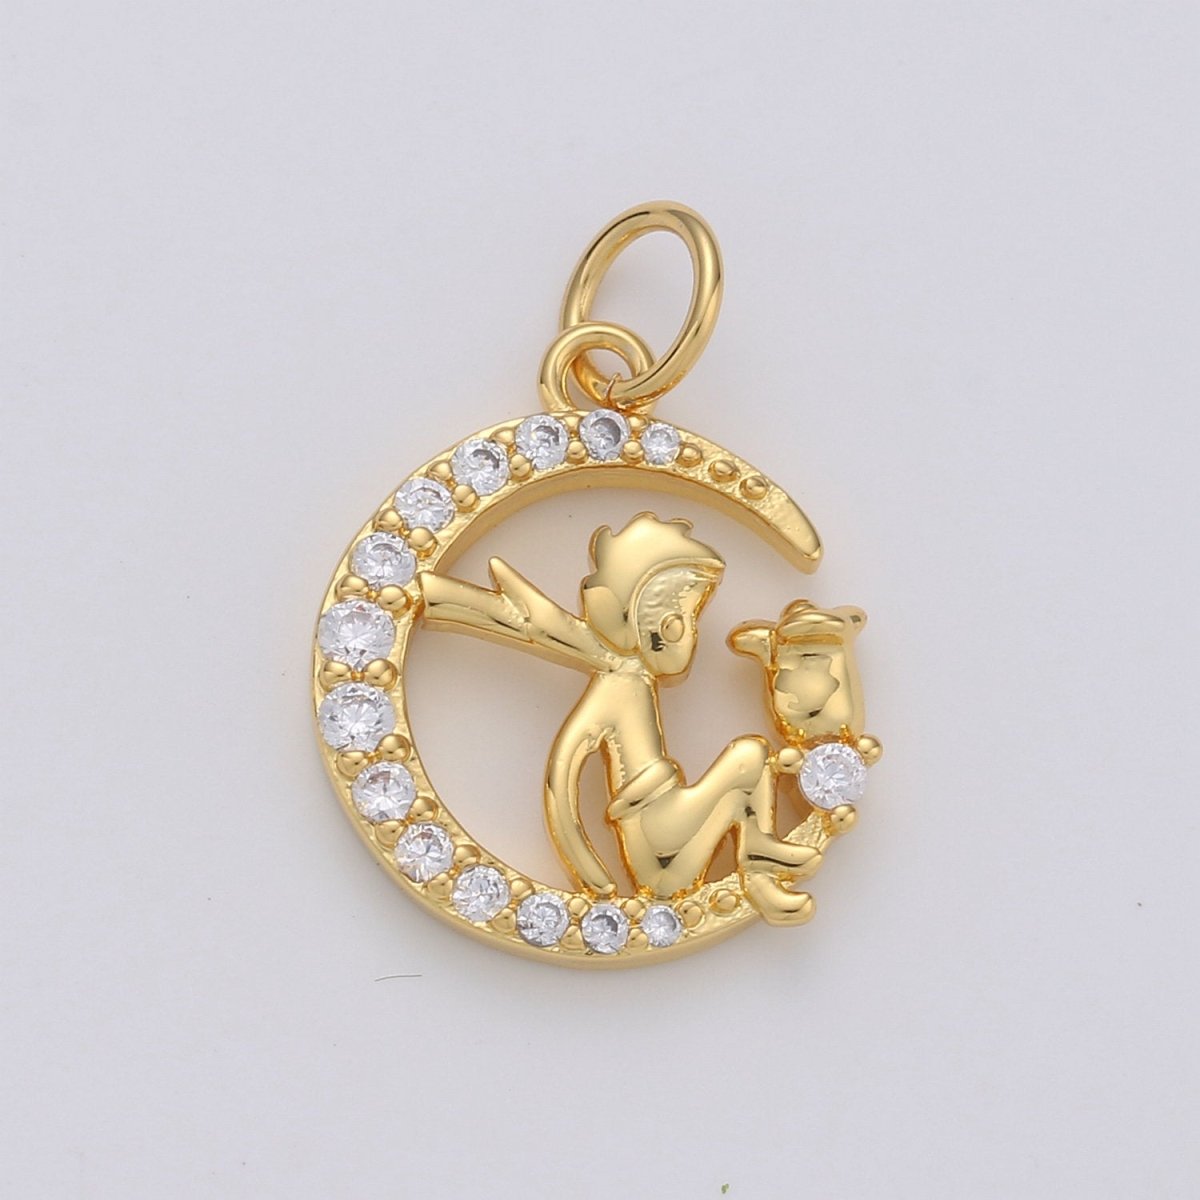 Dainty Gold Fairy Moon Charms Micro Pave Charm Fantasy Jewelry for Bracelet Necklace Charm D-123 - DLUXCA